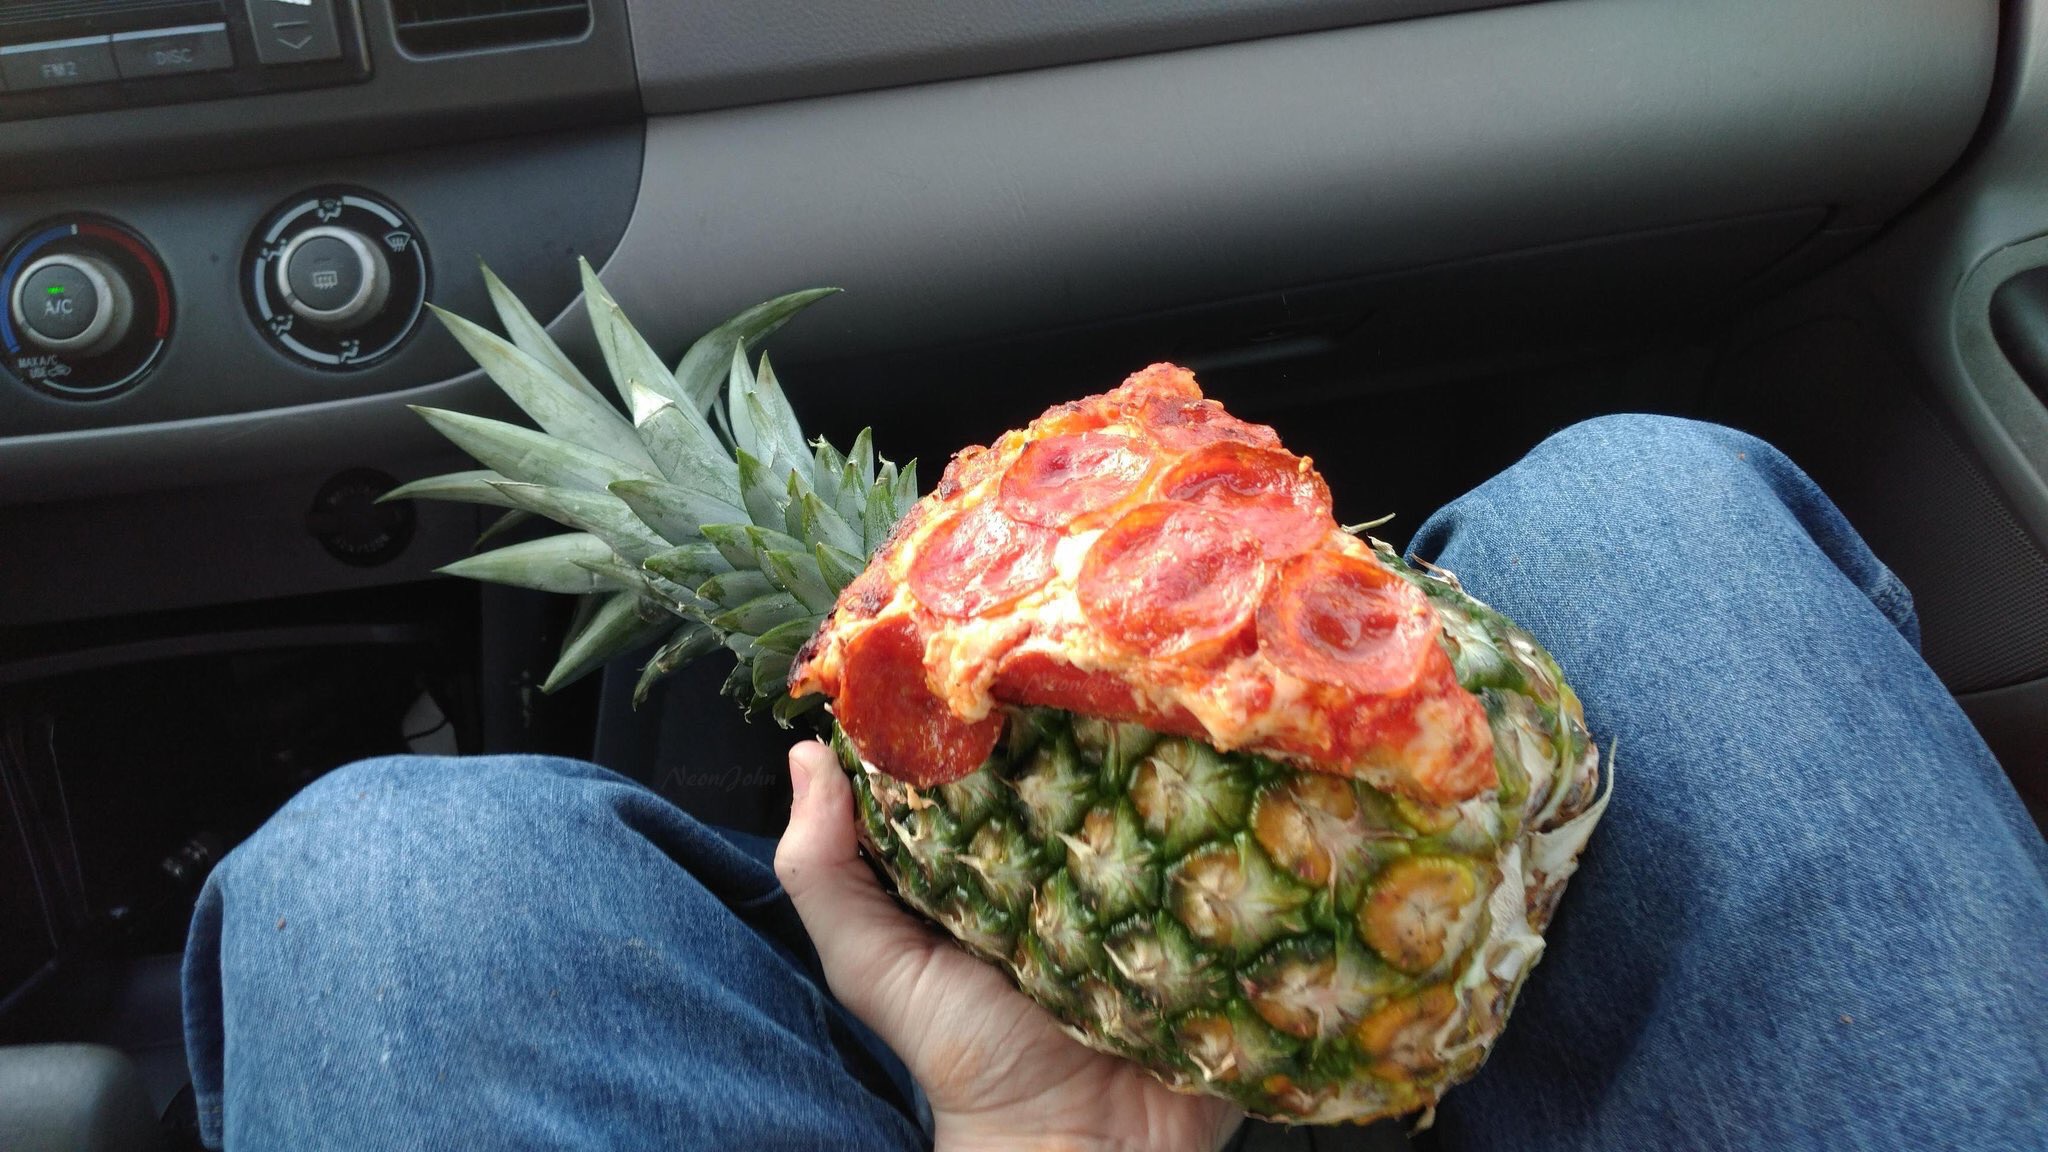 pineapple with pizza